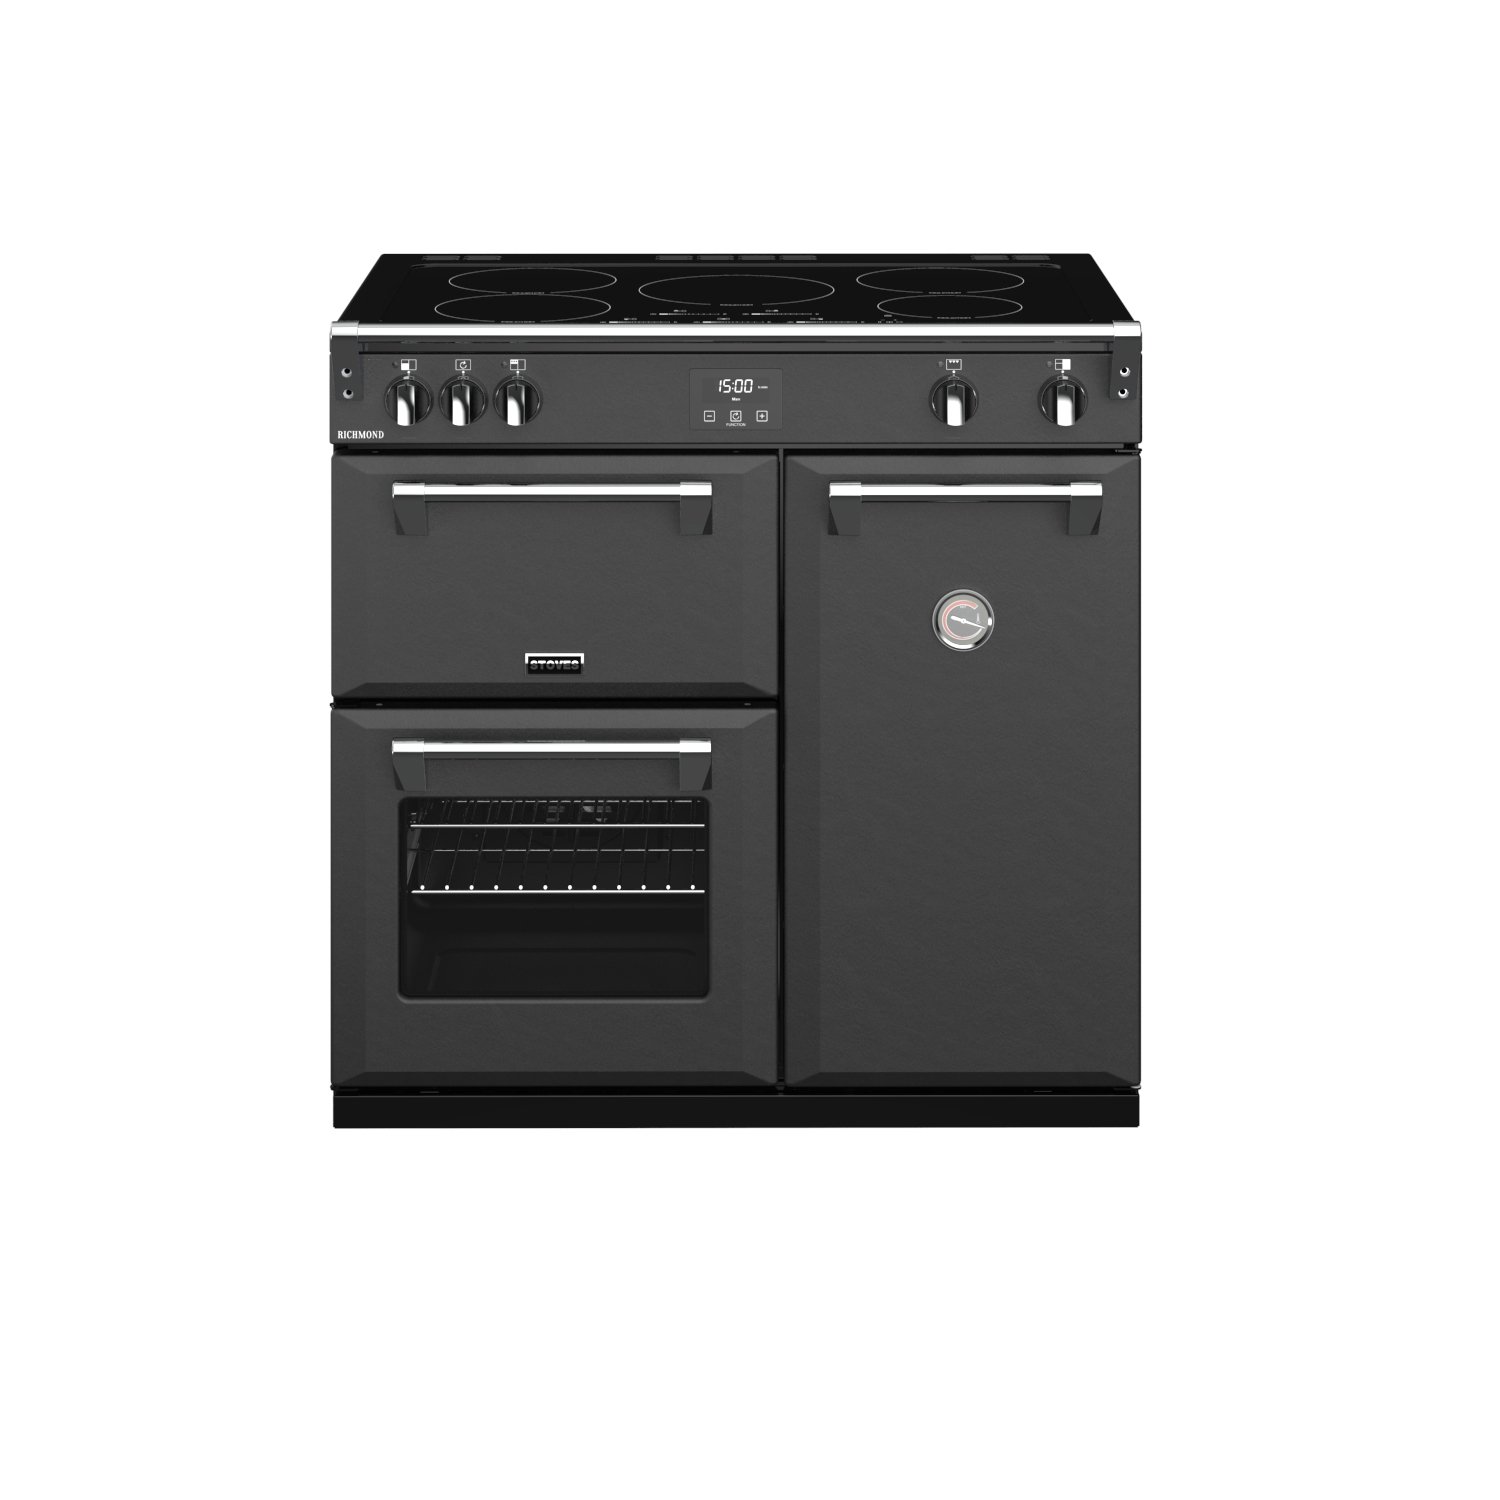 90cm Electric Induction Range Cooker With A 5 Zone Induction Hob, Conventional Oven & Grill, Multifunction Main Oven And Tall Fanned Oven. Requires 32A connection.